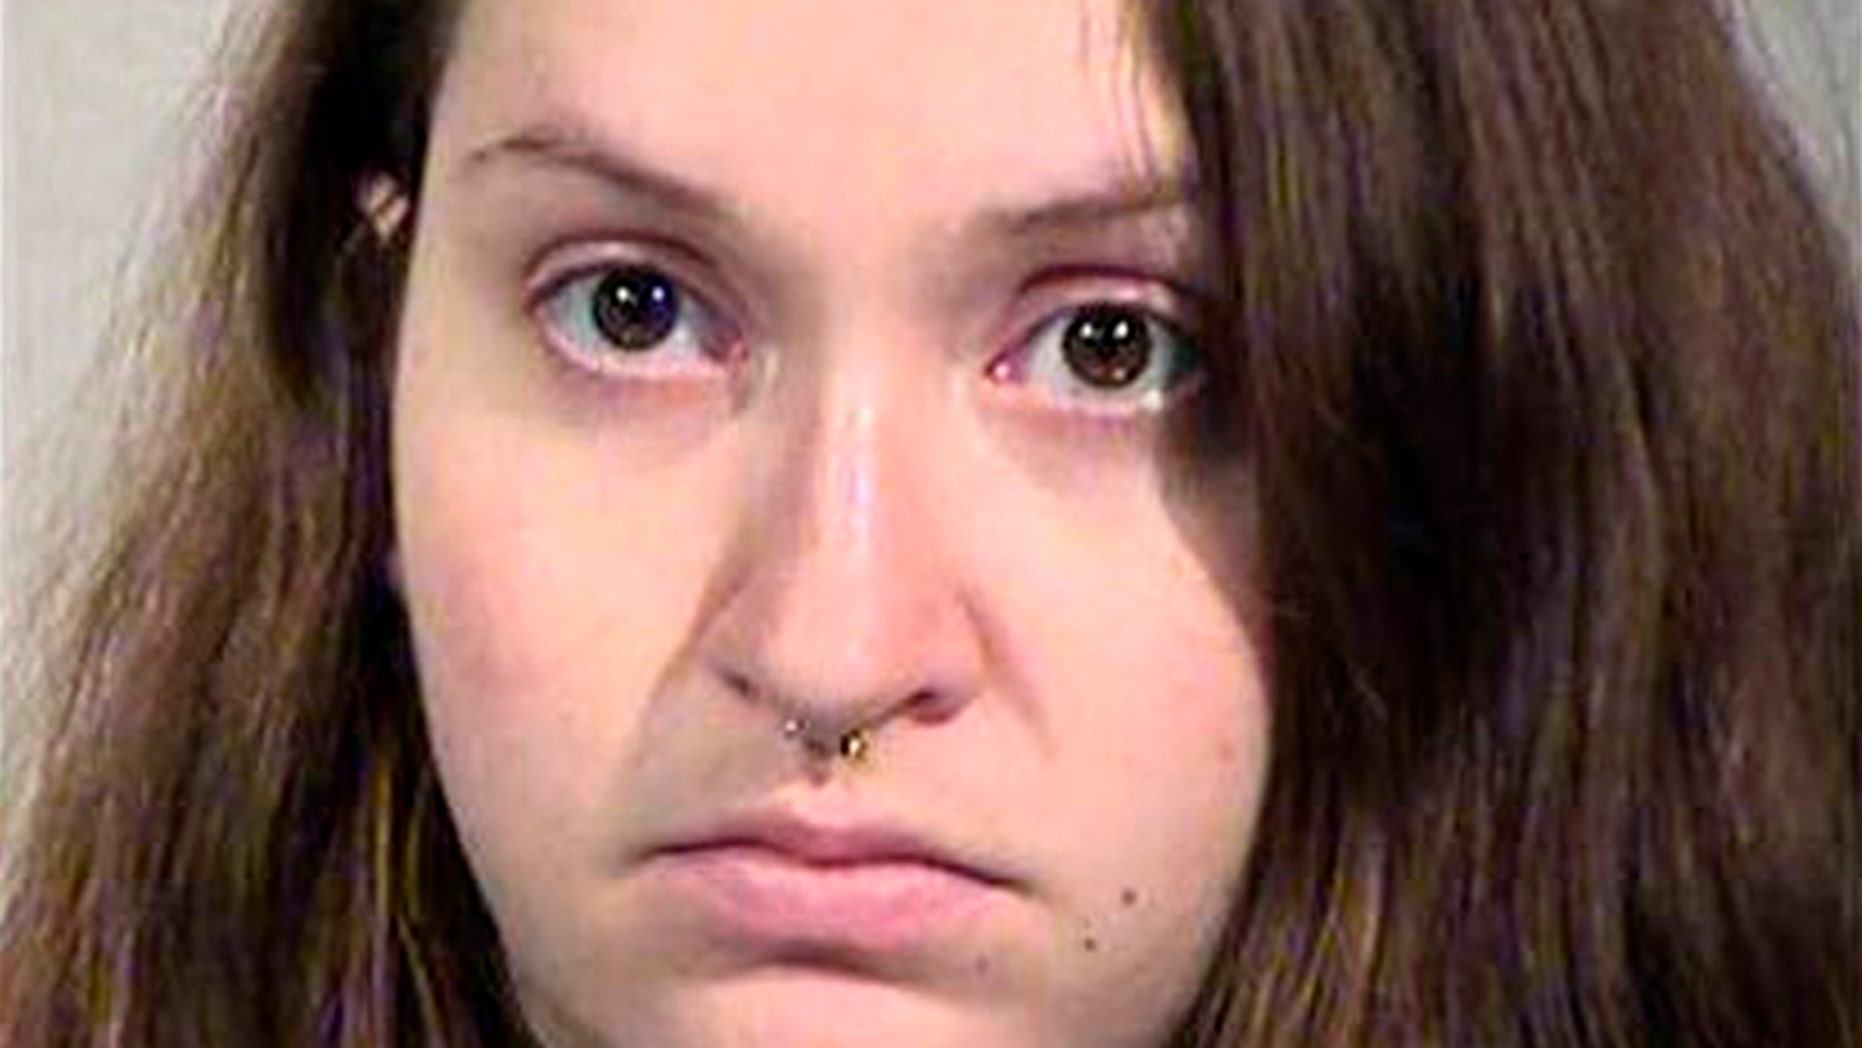 Mother accused of disposing newborn at Amazon facility claims she didn